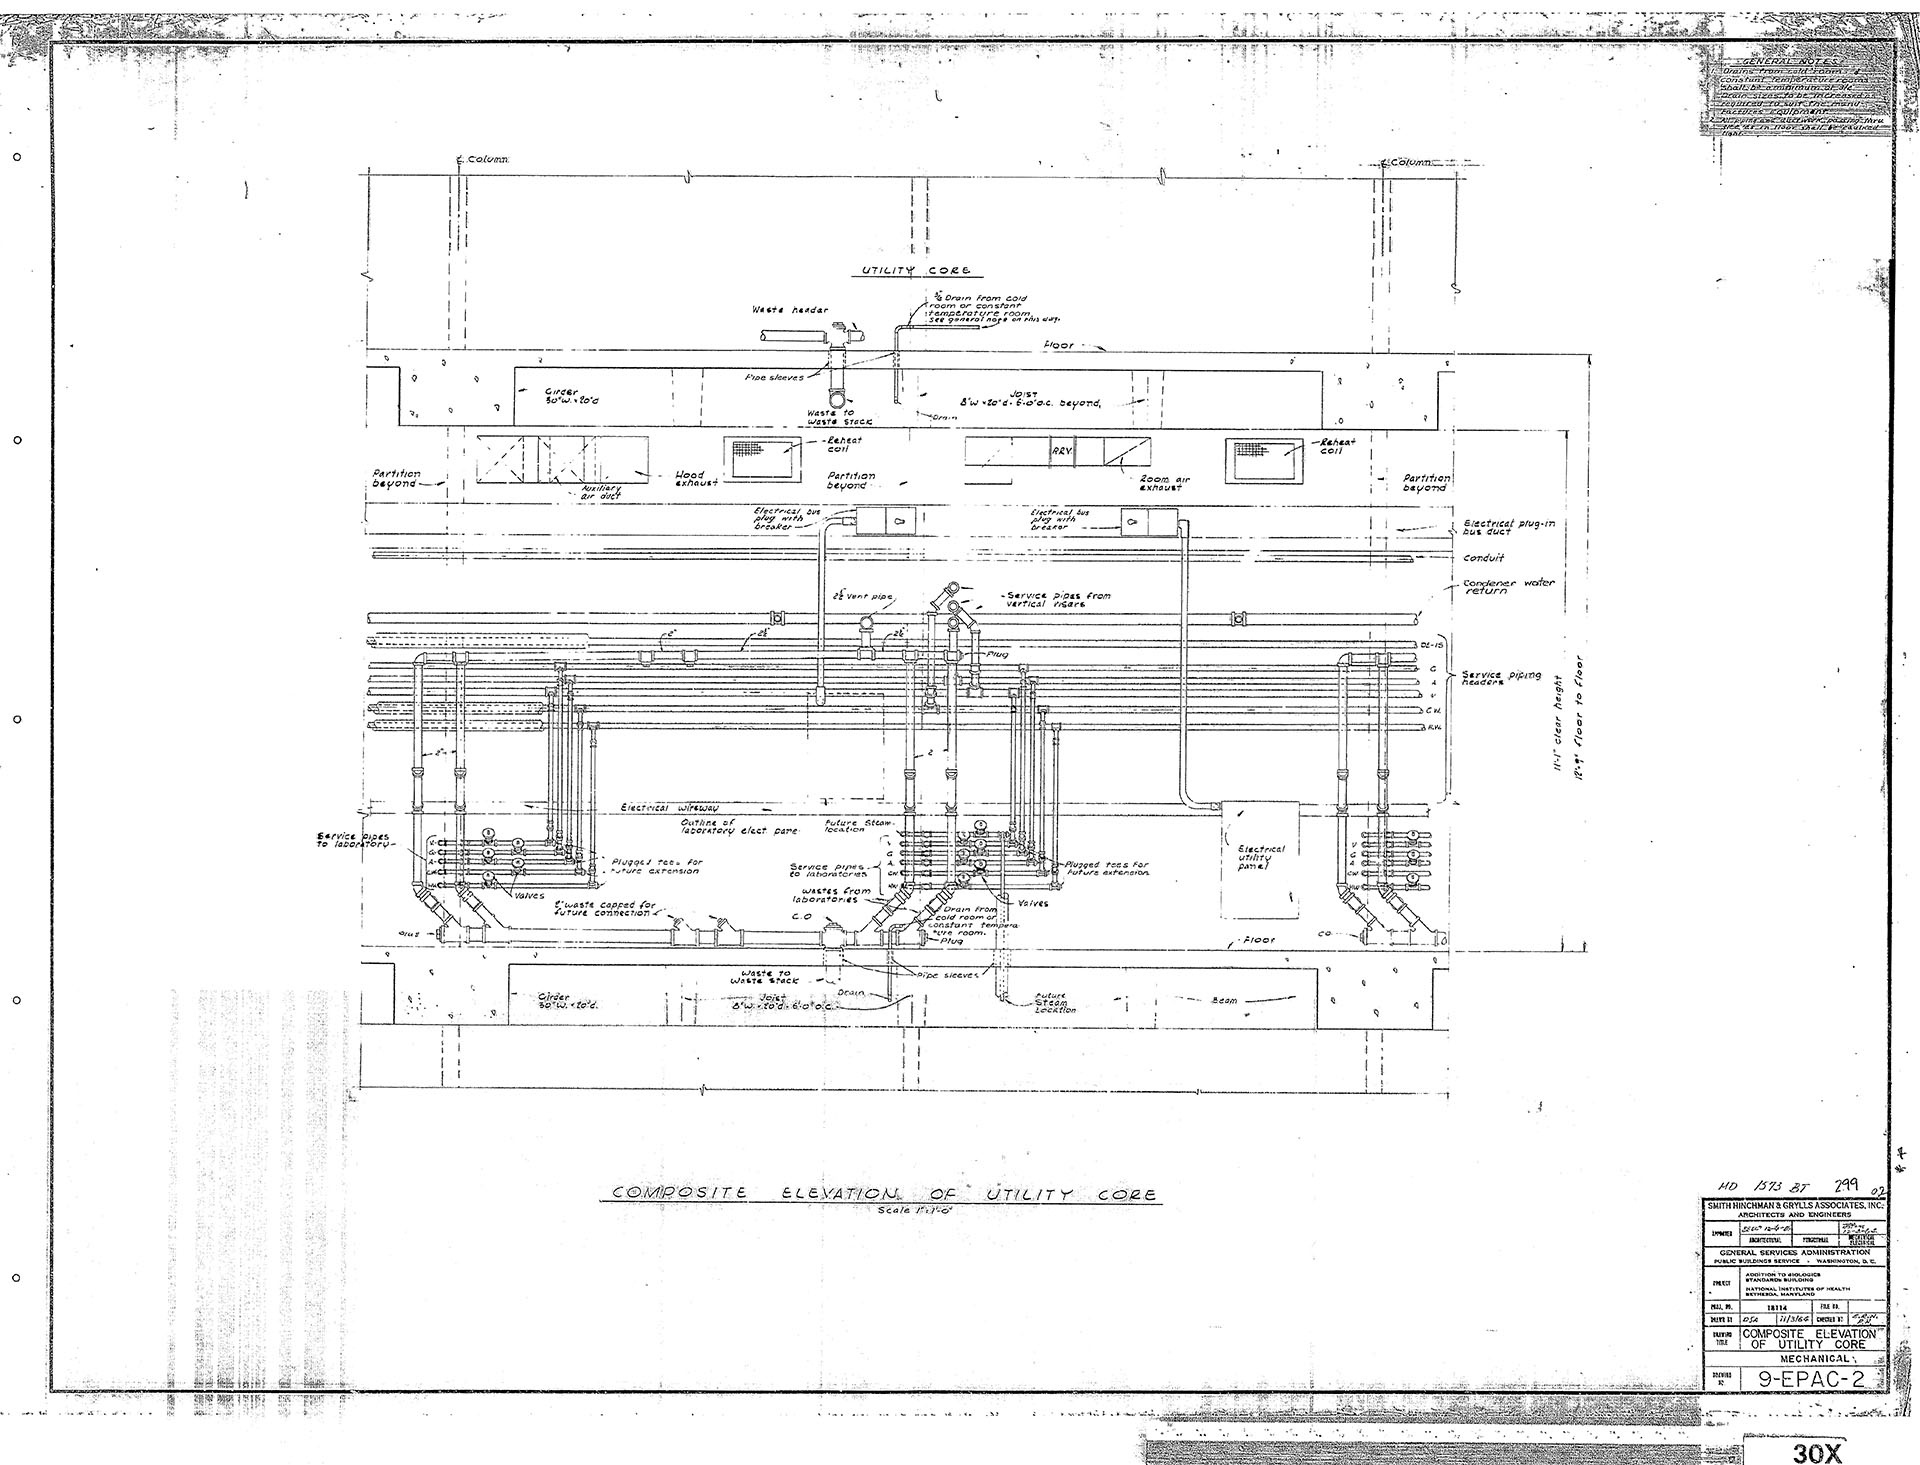 elevation drawing of the utility core of Building 29A